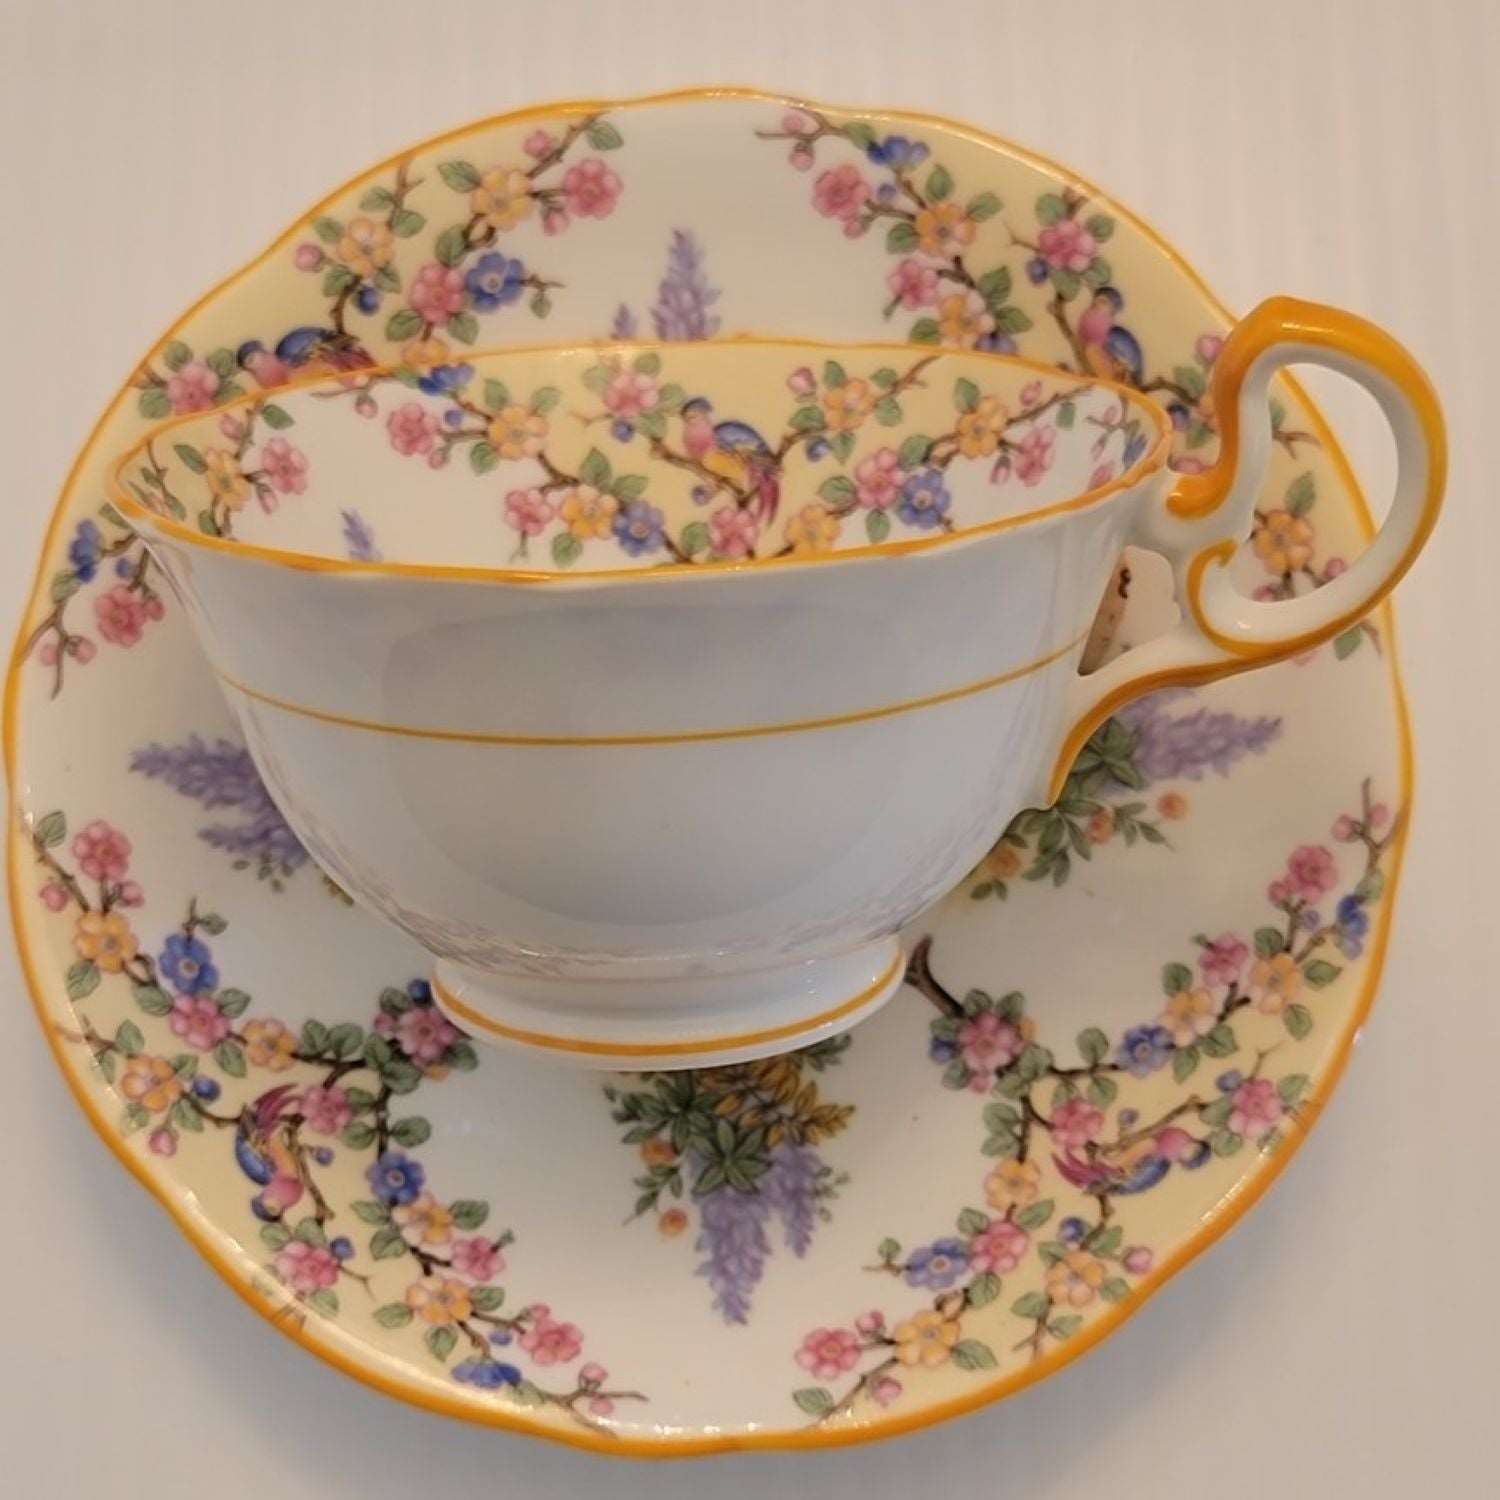 Aynsley Bird and Lupin Vintage Tea Cup and Saucer Set